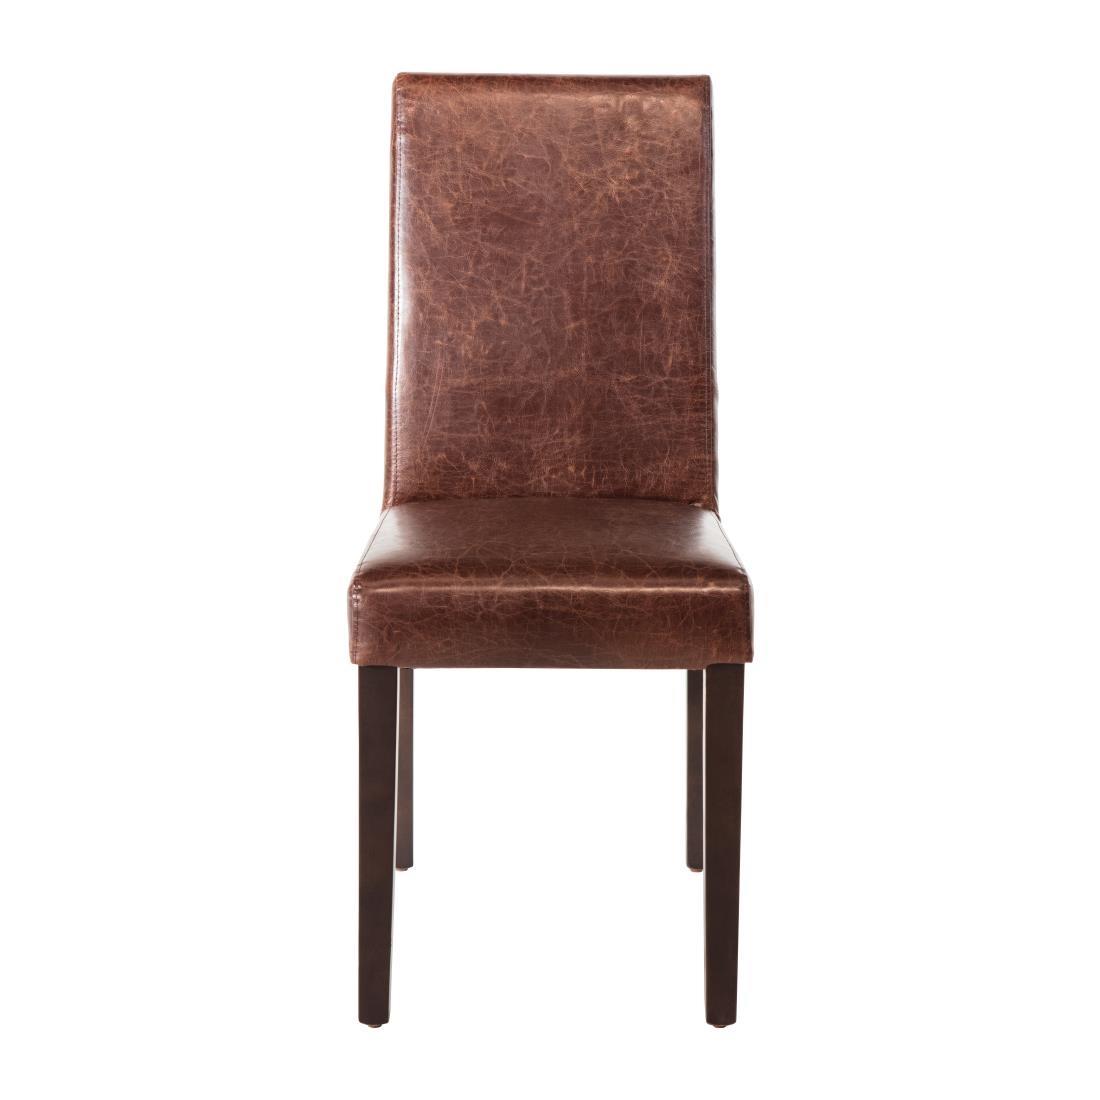 Bolero Faux Leather Dining Chair Antique Brown (Pack of 2) - GR369  - 2